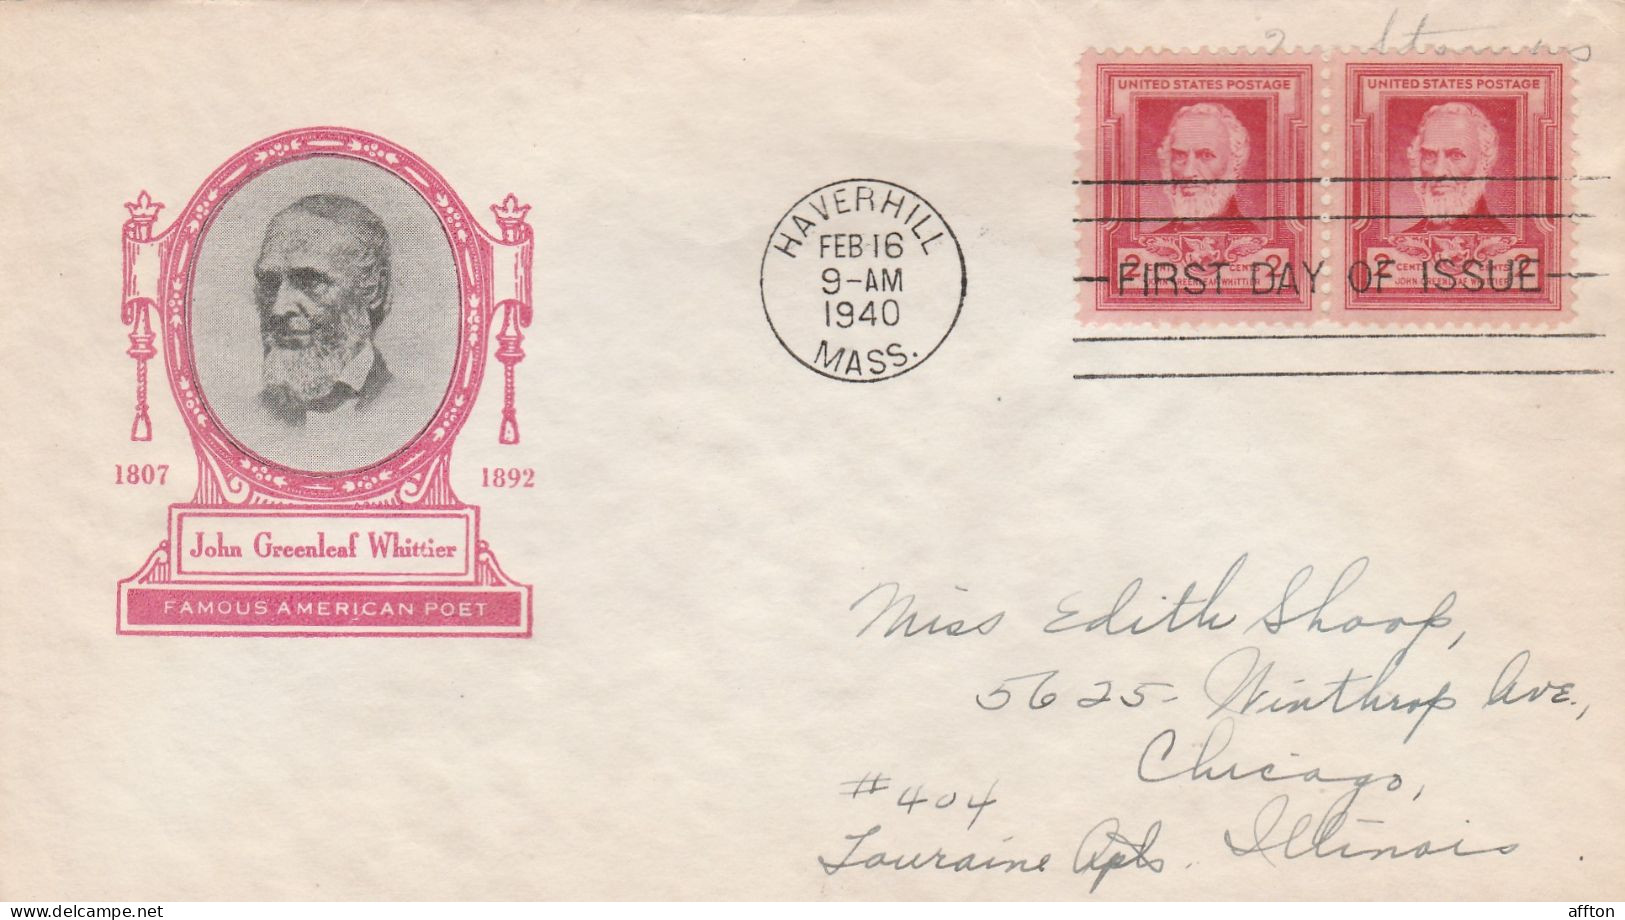 United States 1940 FDC Mailed - 1851-1940